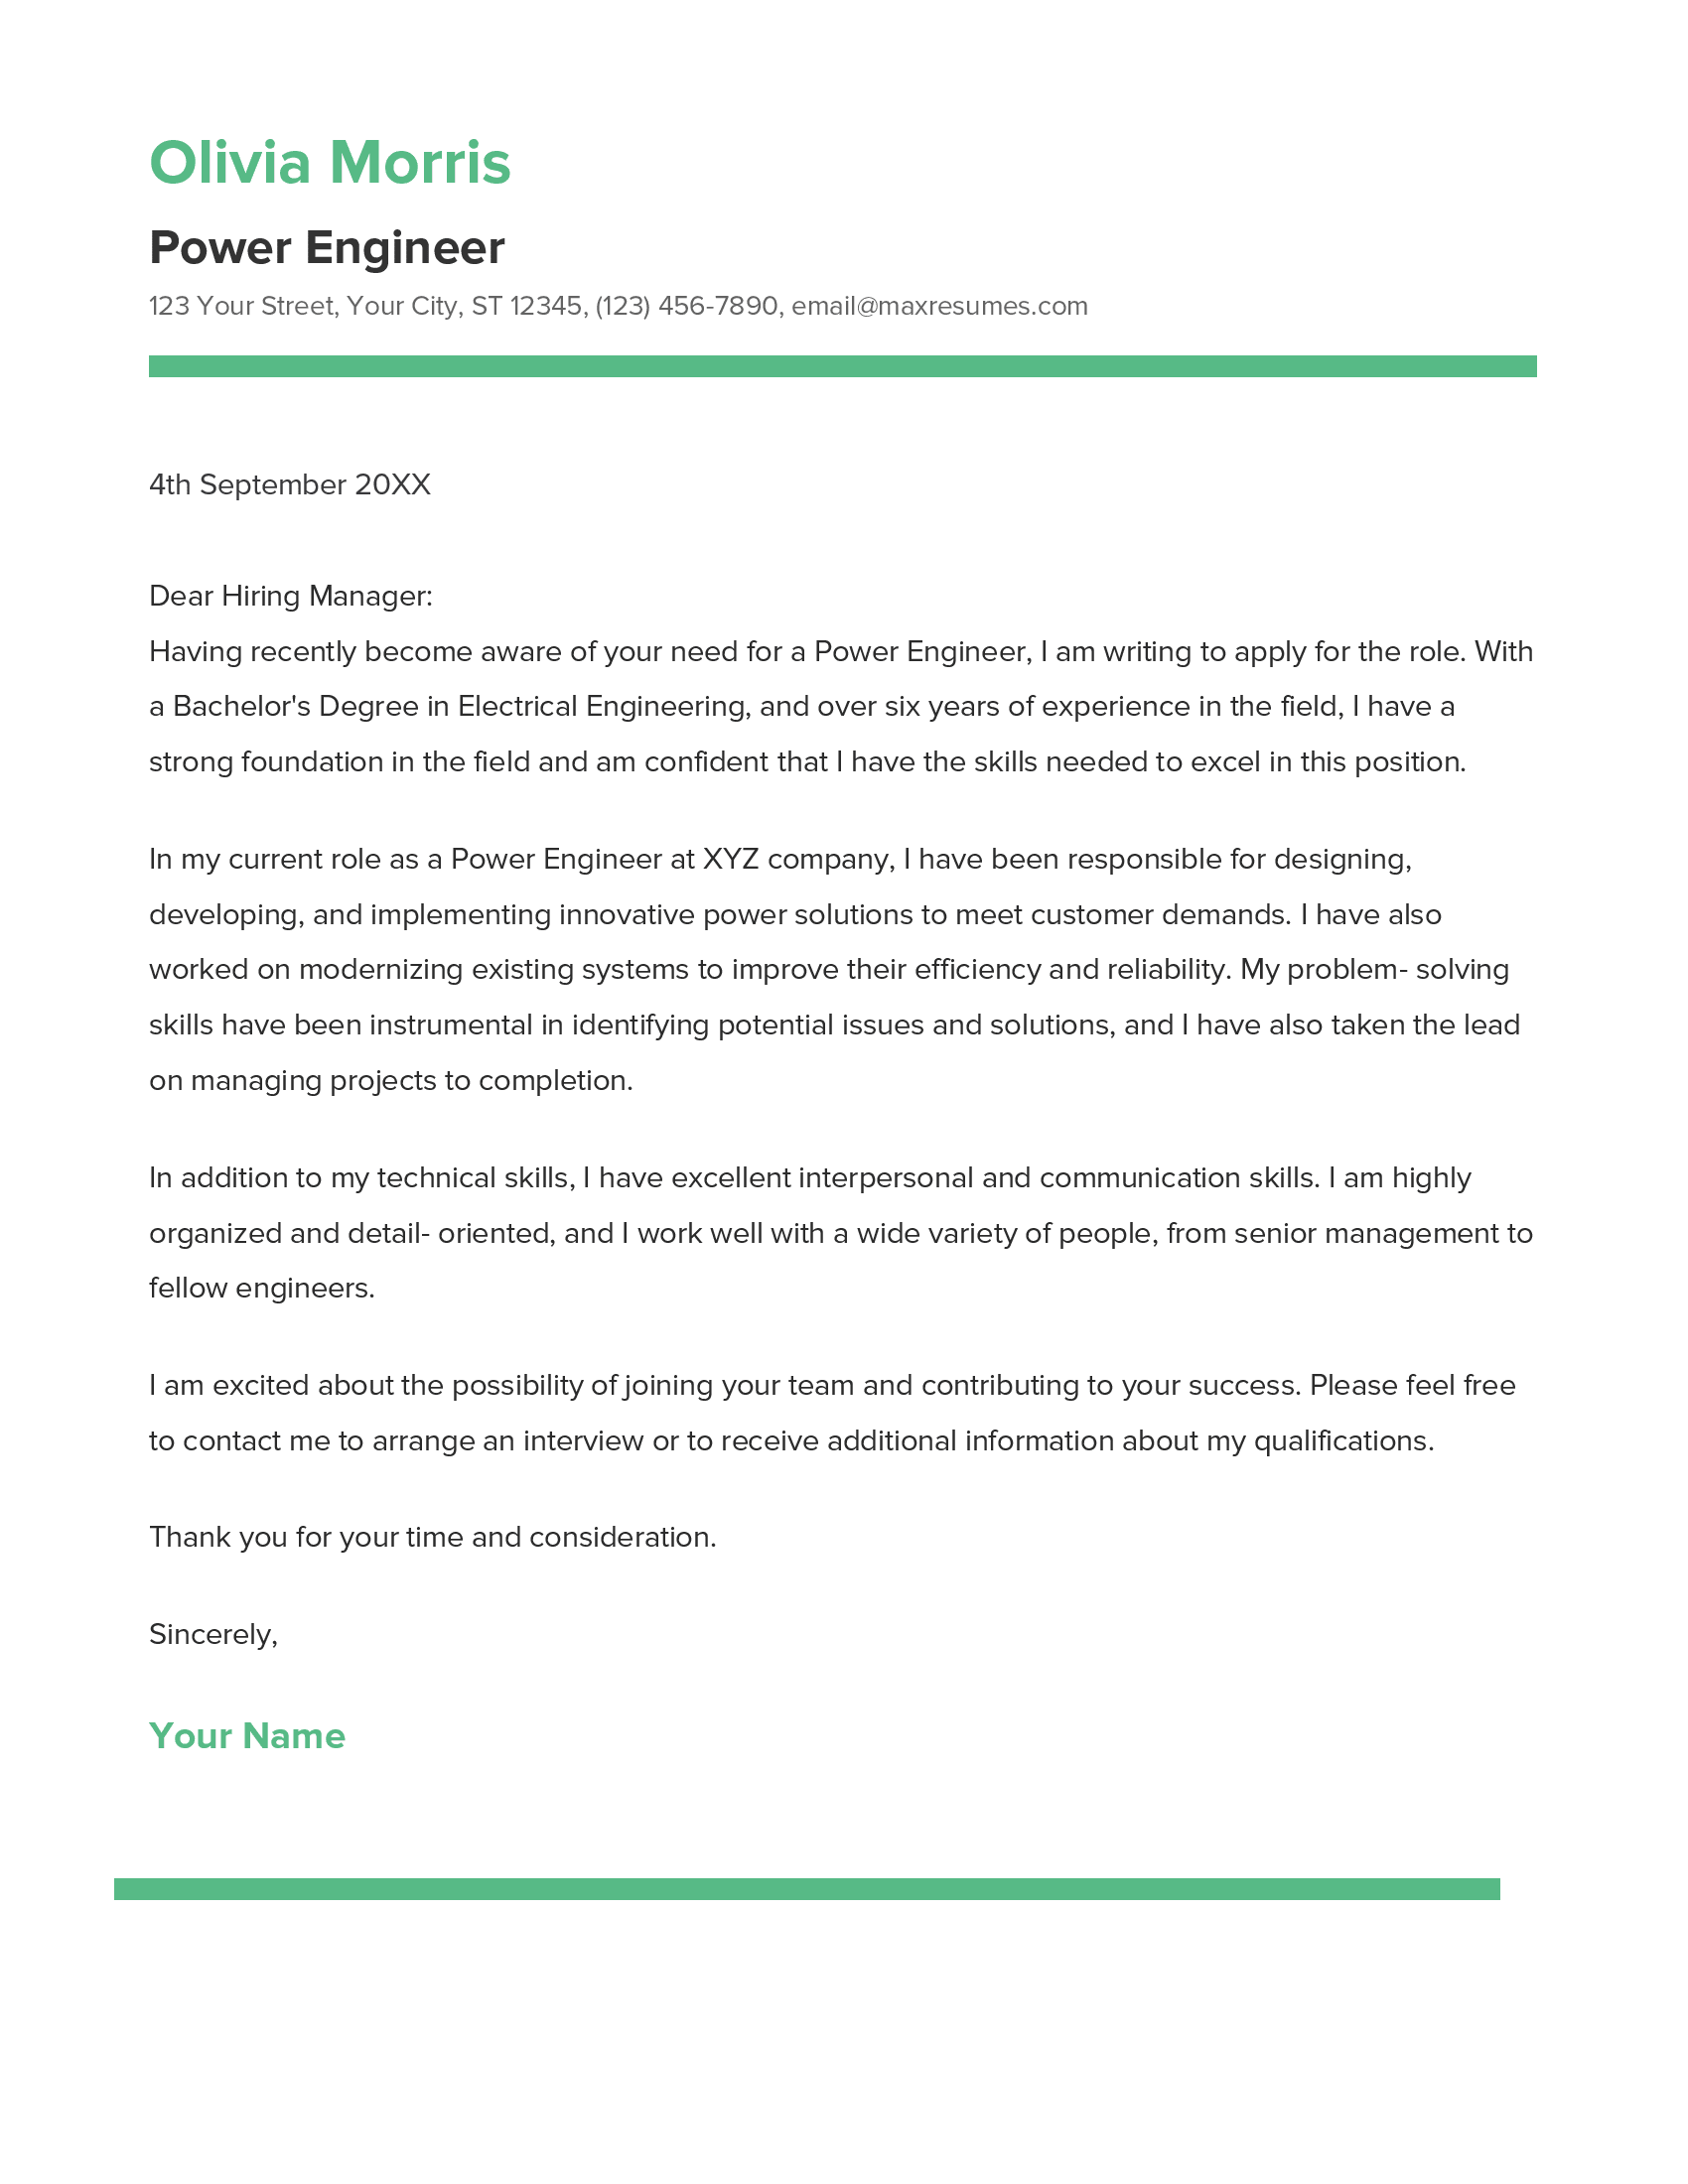 Power Engineer Cover Letter Example